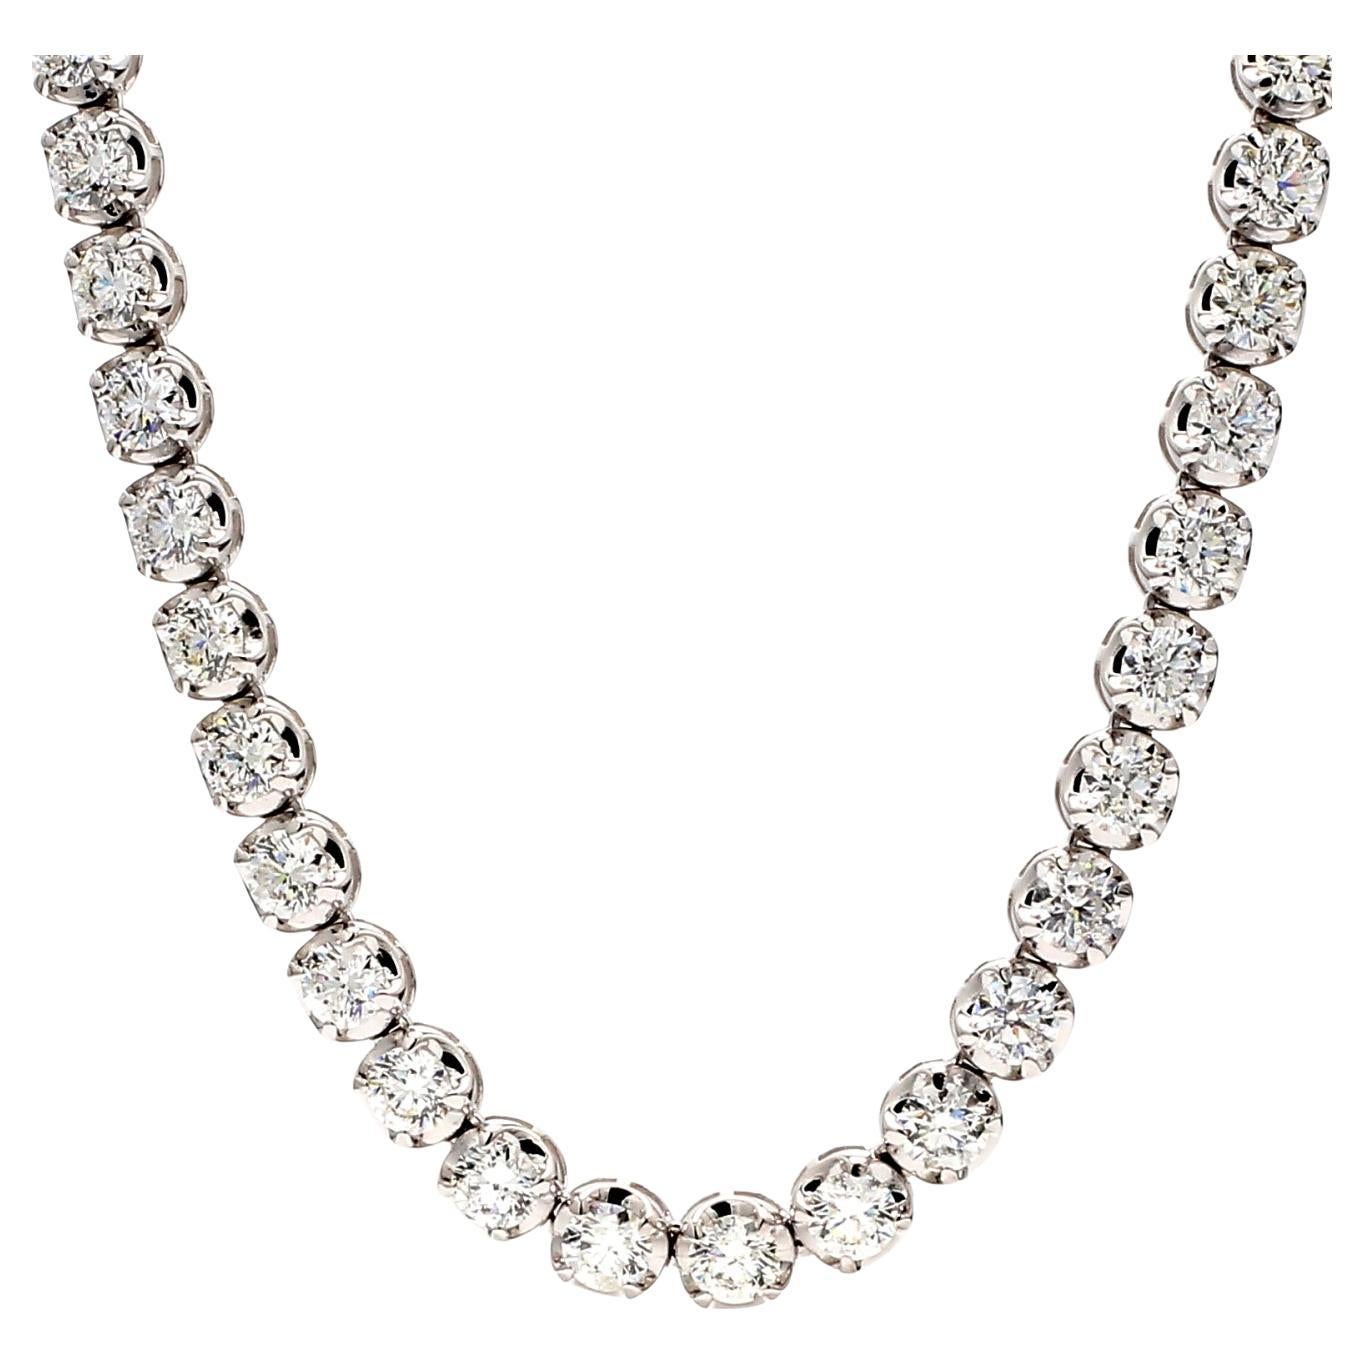 Tennis Necklace in 14K White Gold with Round Diamonds. D10.70ct.t.w.